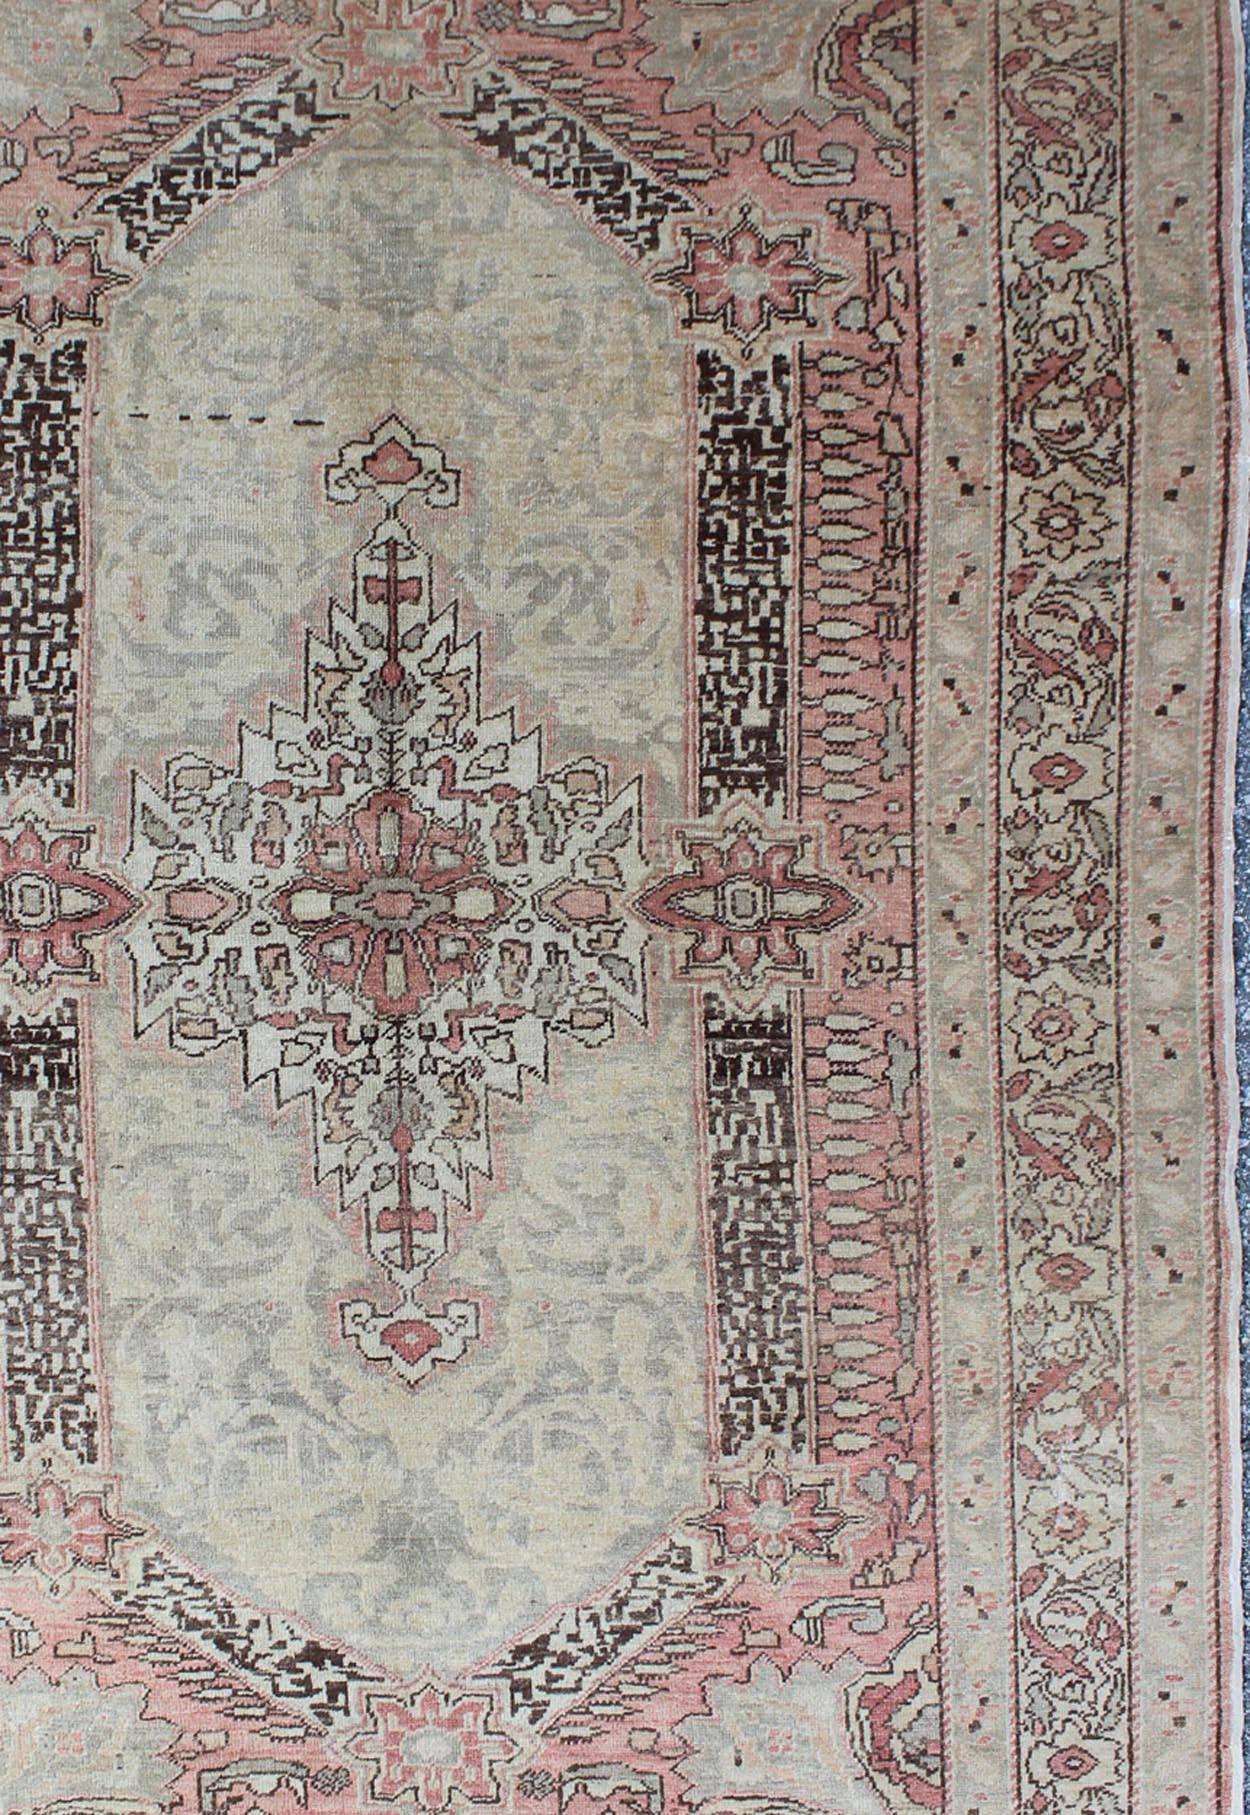 Early 20th Century Antique Turkish Sivas Rug with Delicate Pink Center Medallion In Excellent Condition For Sale In Atlanta, GA